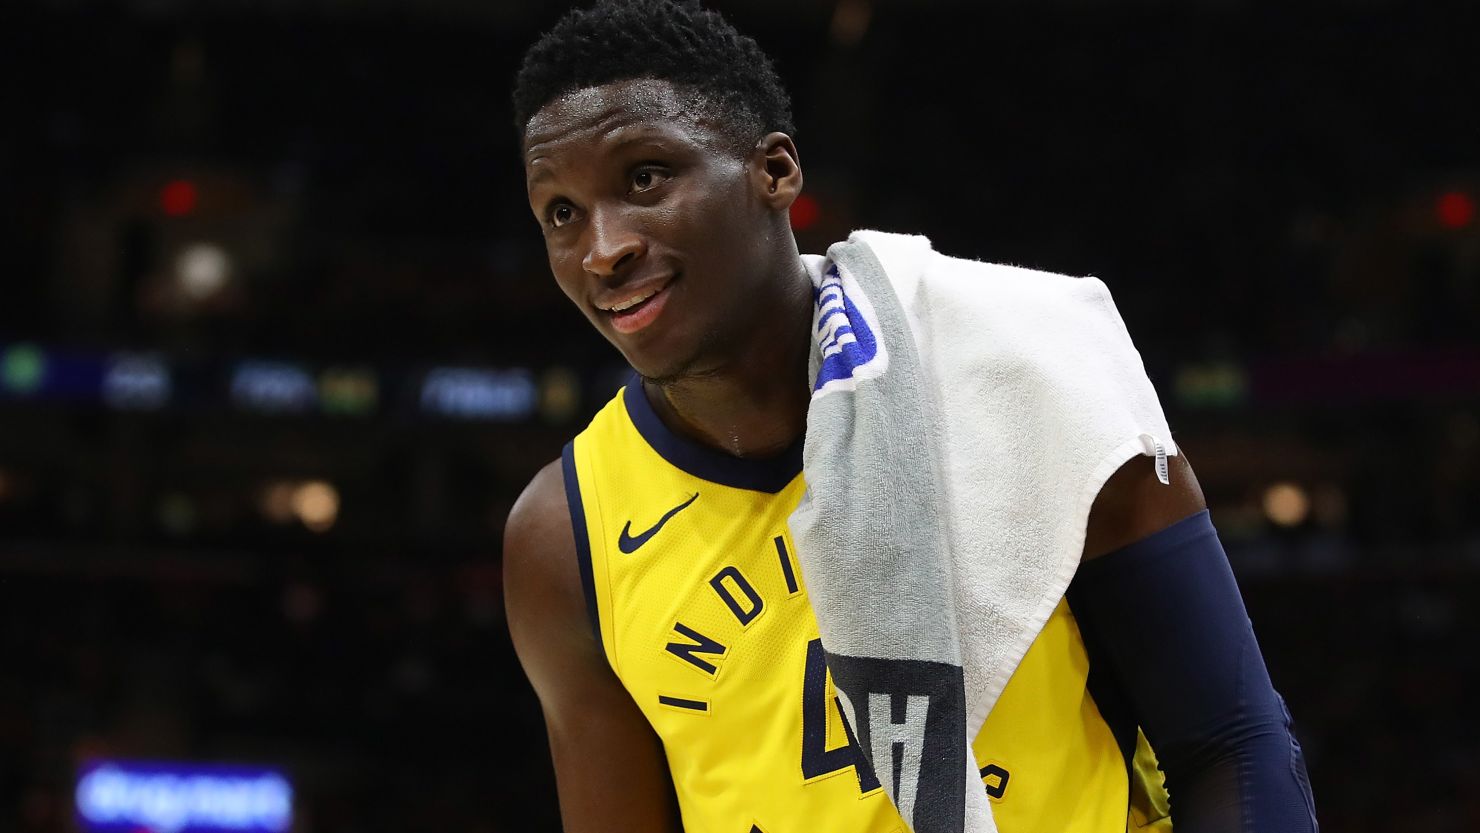 Victor Oladipo received the car when he won the NBA's Most Improved Player Award.